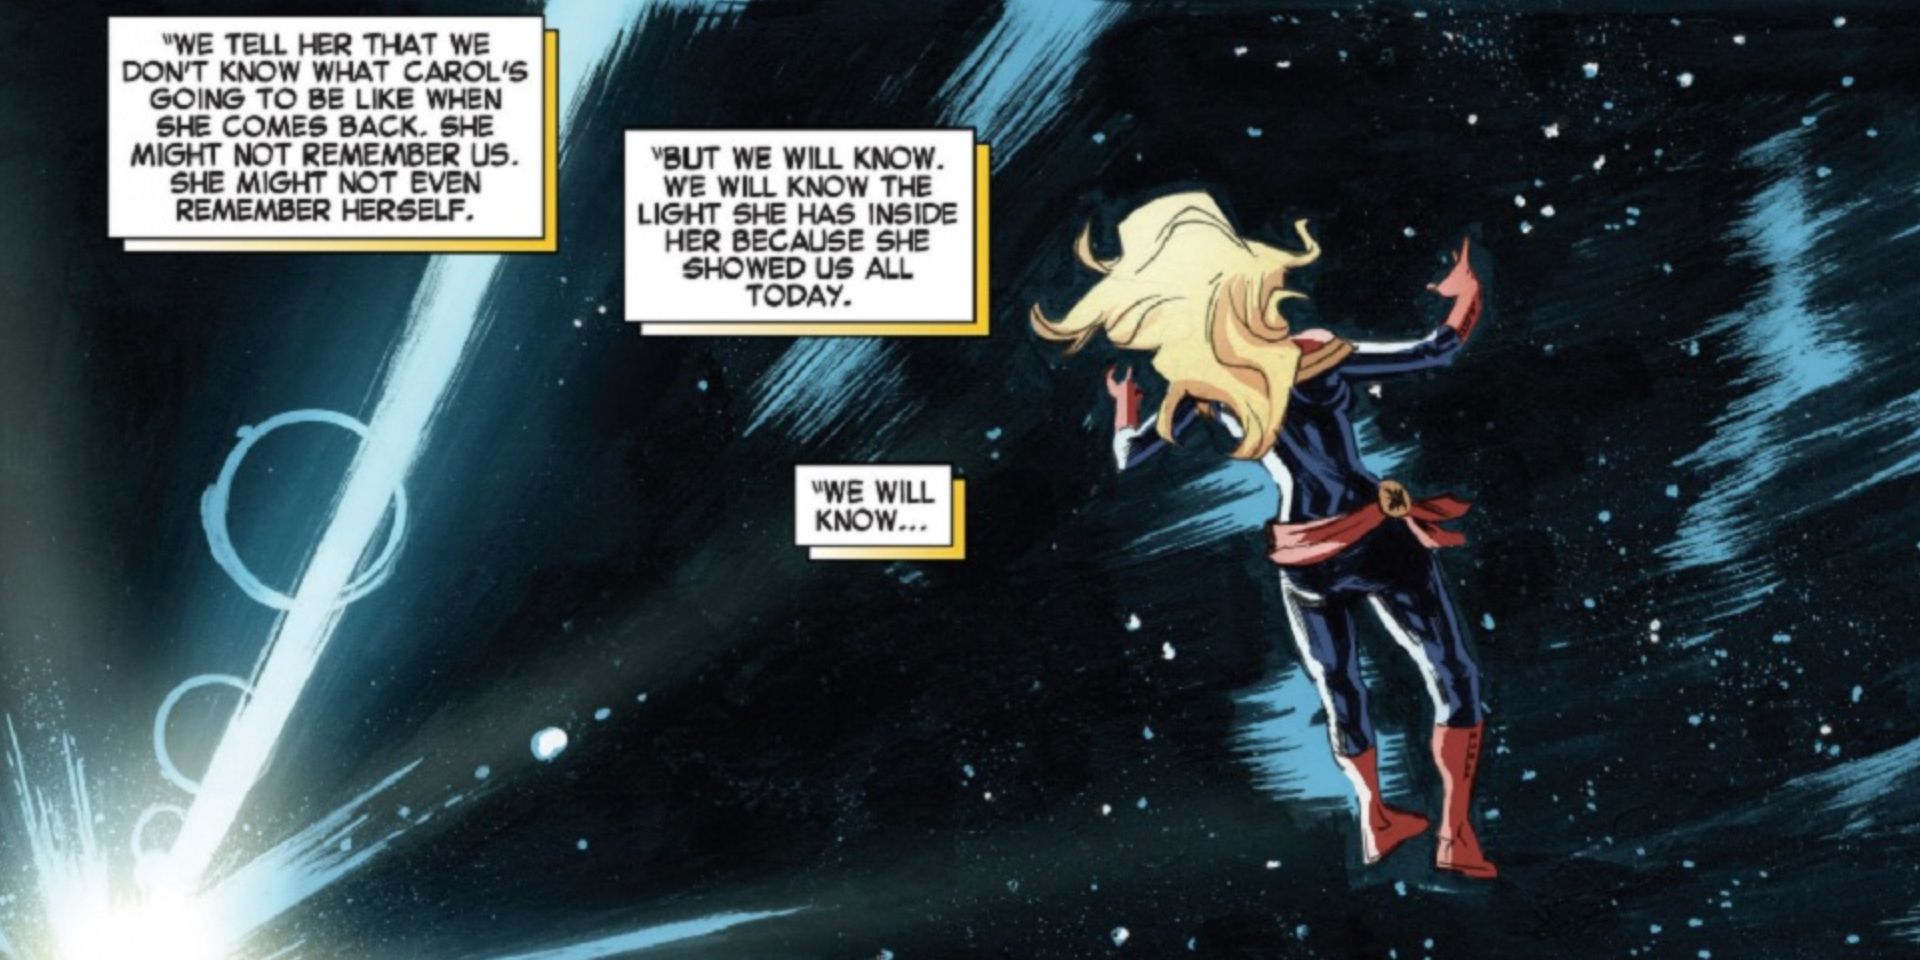 Carol Danvers floating in space alongside text boxes that indicate her memory loss in Marvel Comics